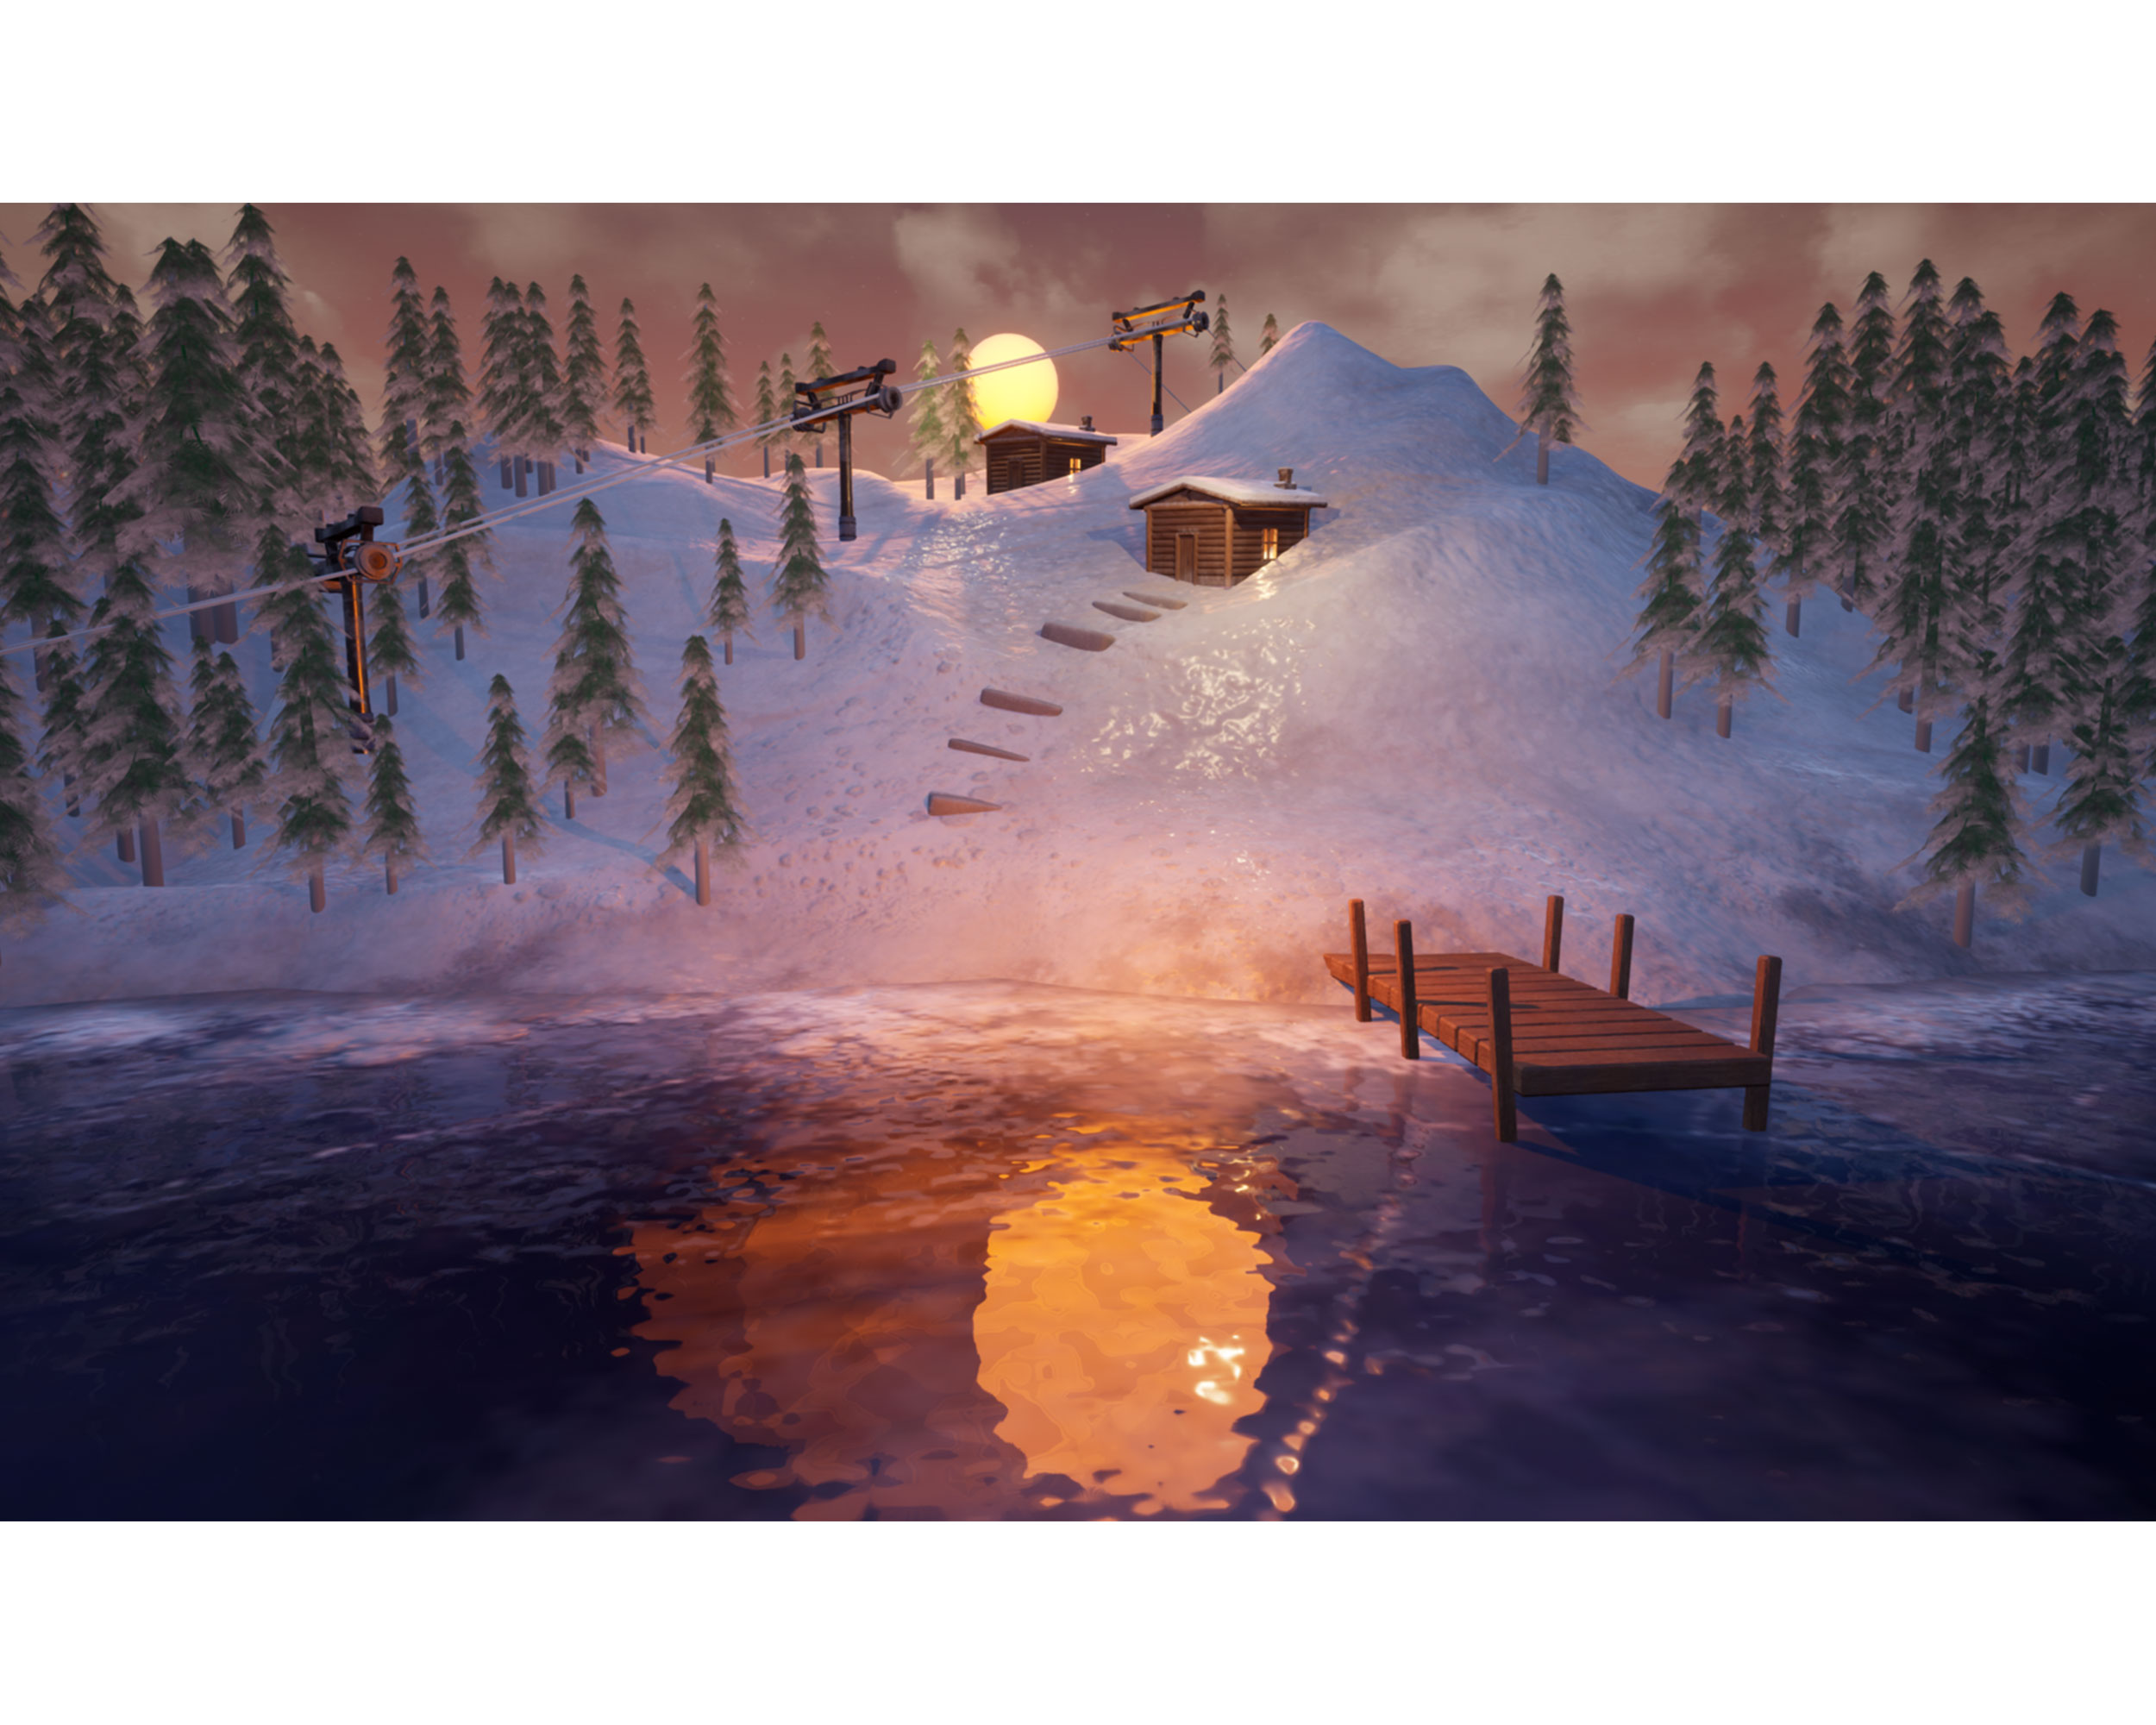 BA Games Art scene by Alexander Norman displaying a sunset over alpine, snowy mountains with log cabins tucked into the landscape.